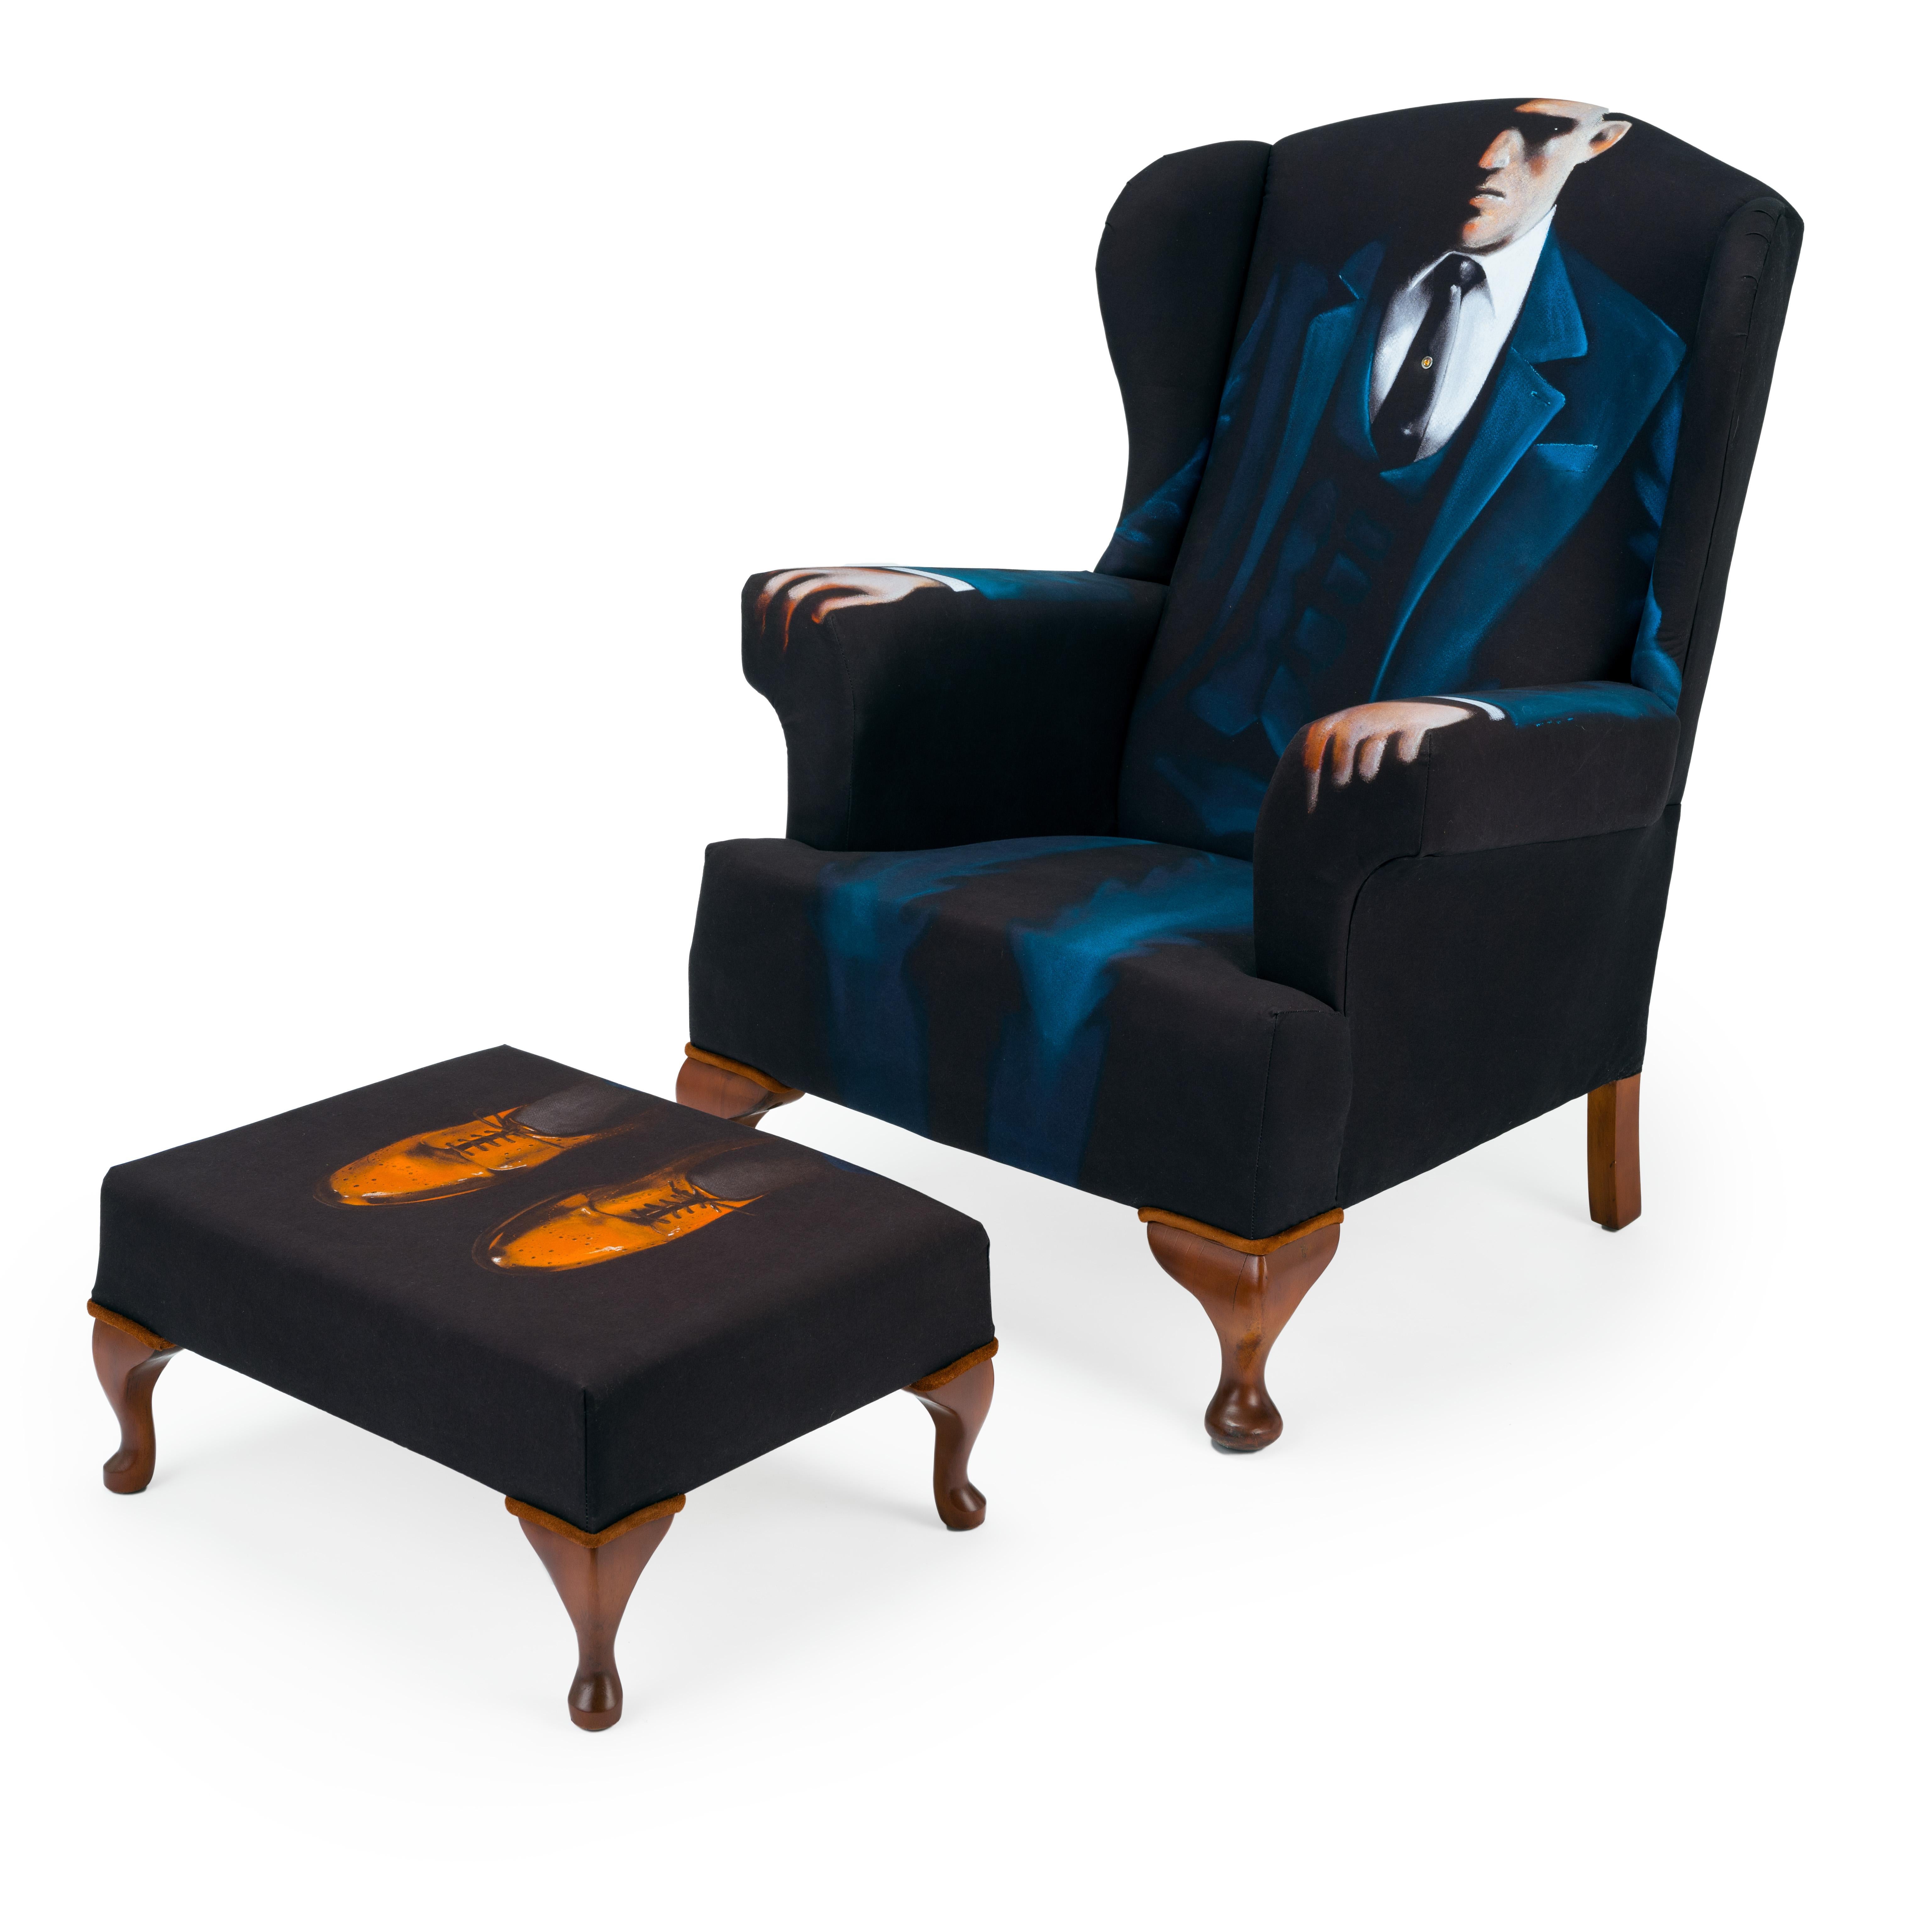 English Midcentury Wing Back Armchair 'the Mafia Boss’  Bespoke Unique One of a Kind